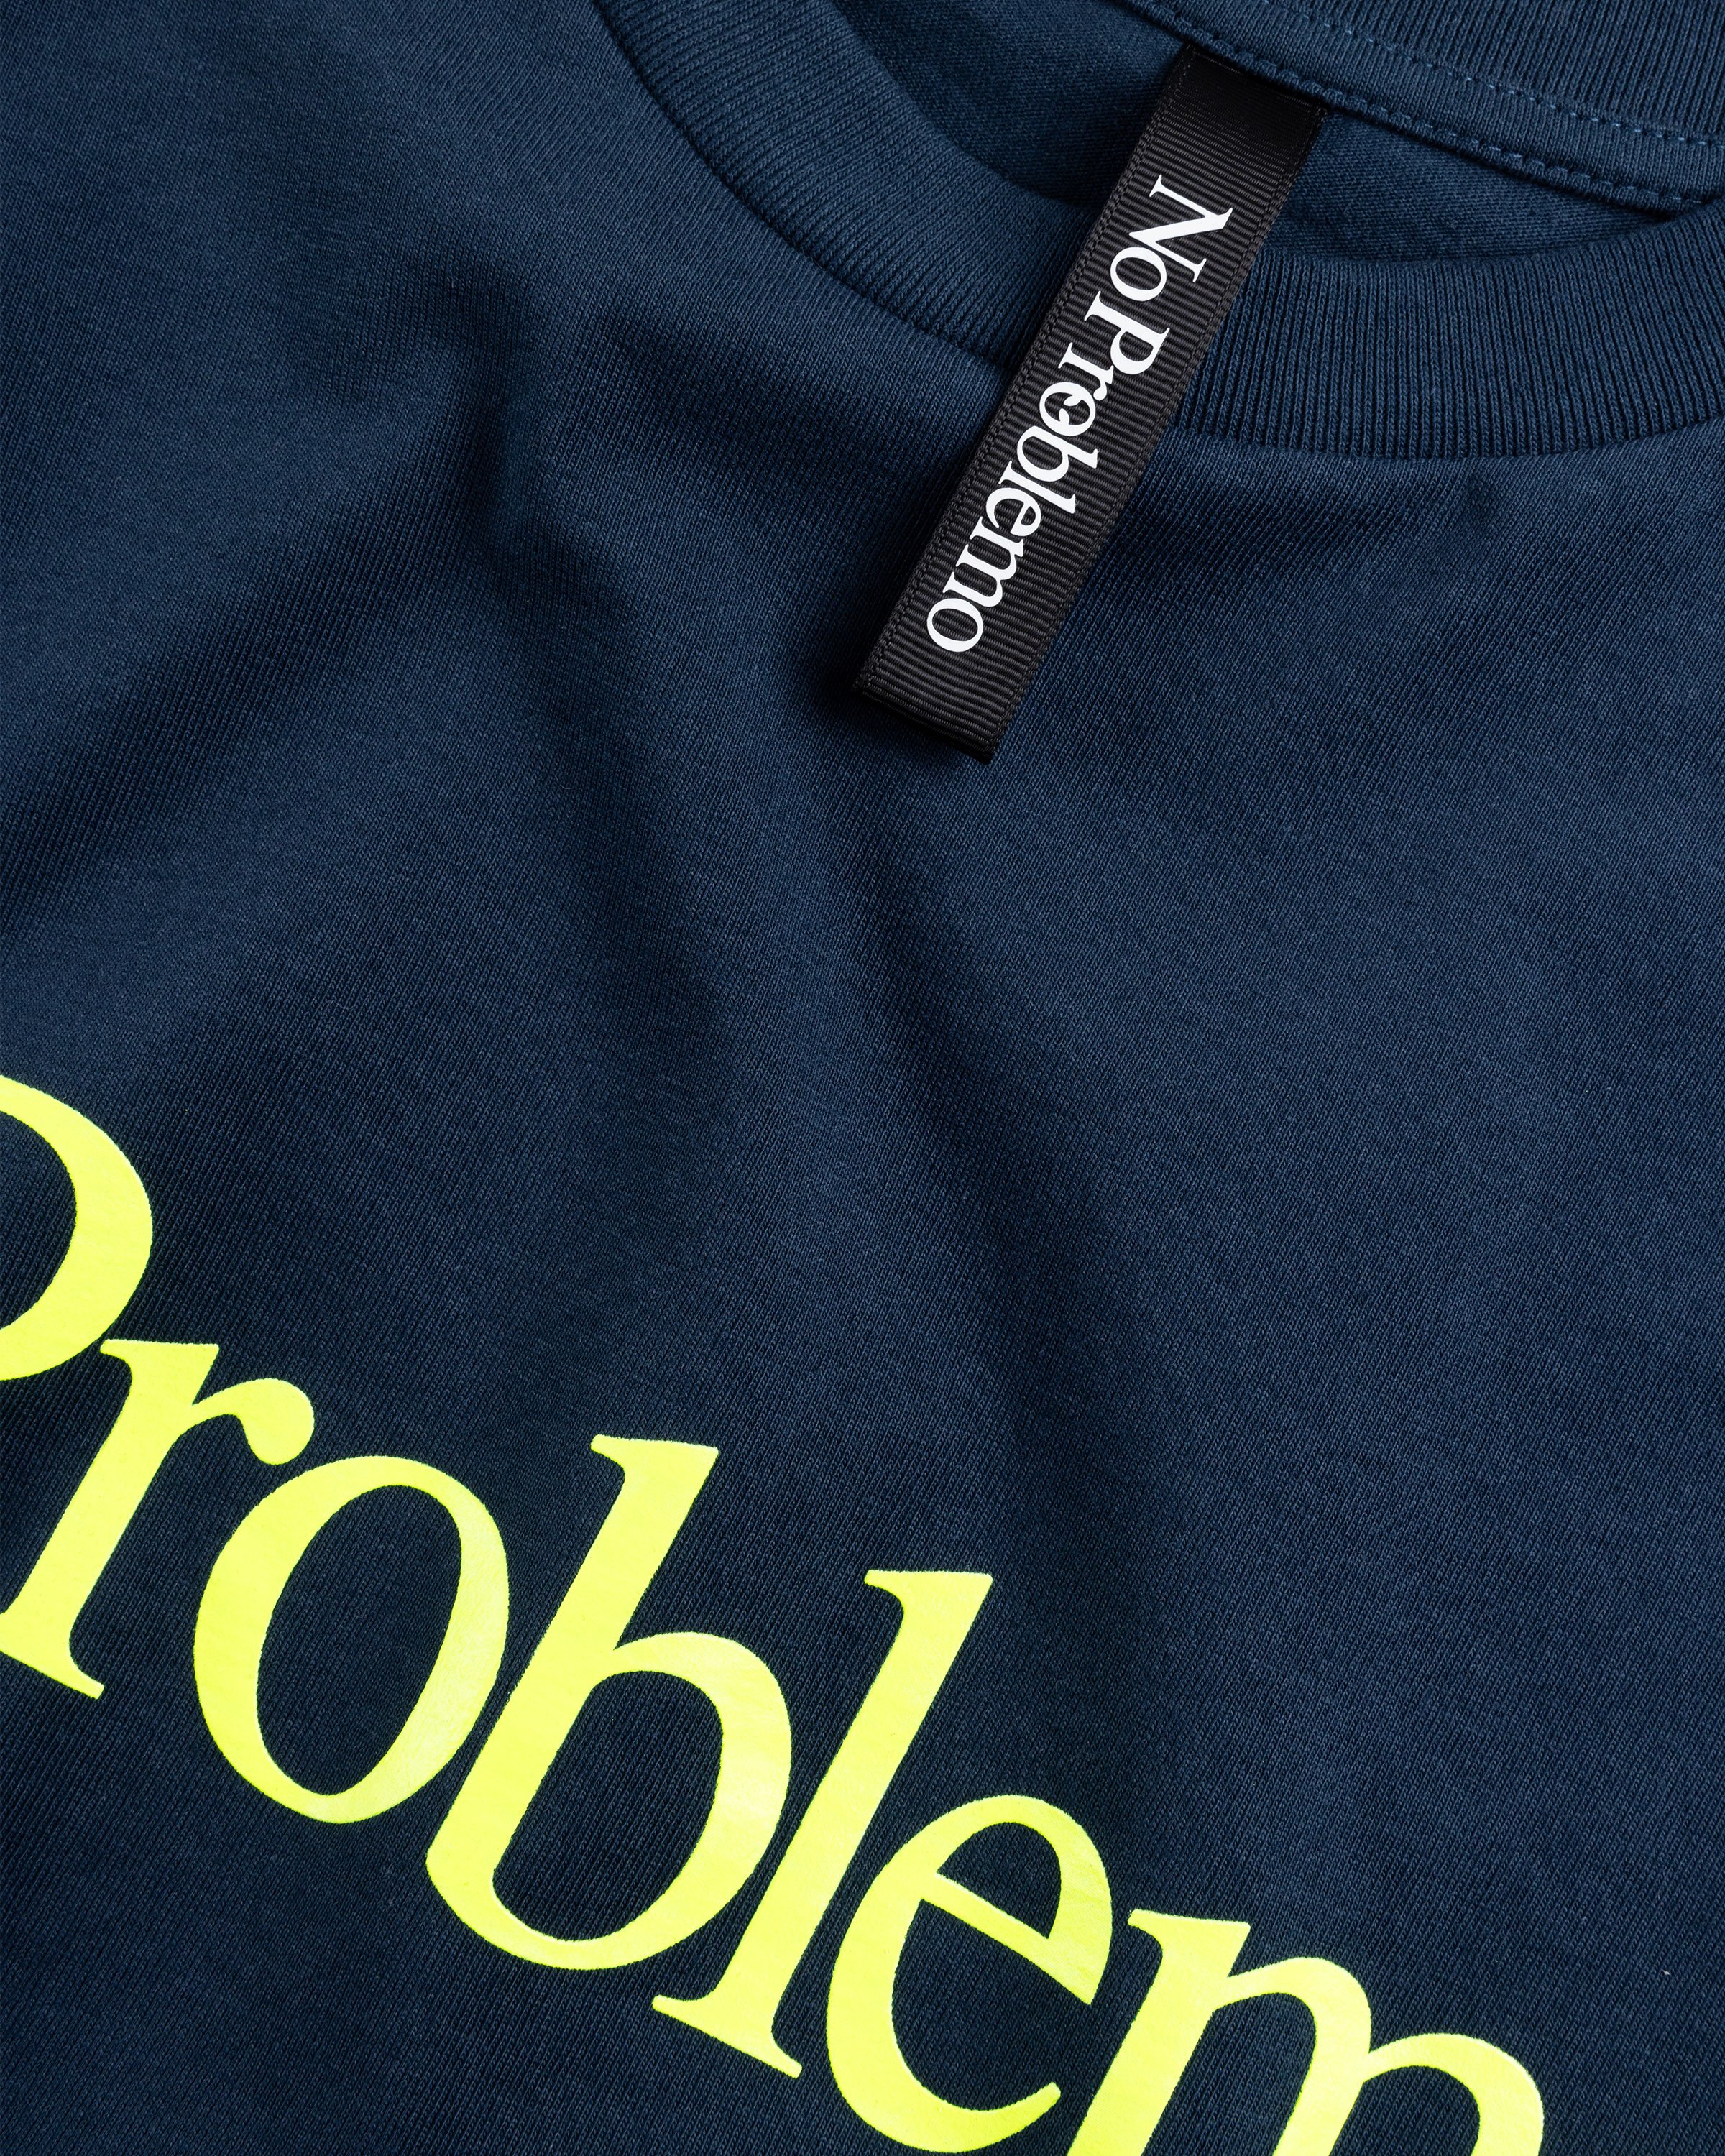 Aries - No Problemo SS Tee Navy - Clothing - Blue - Image 7